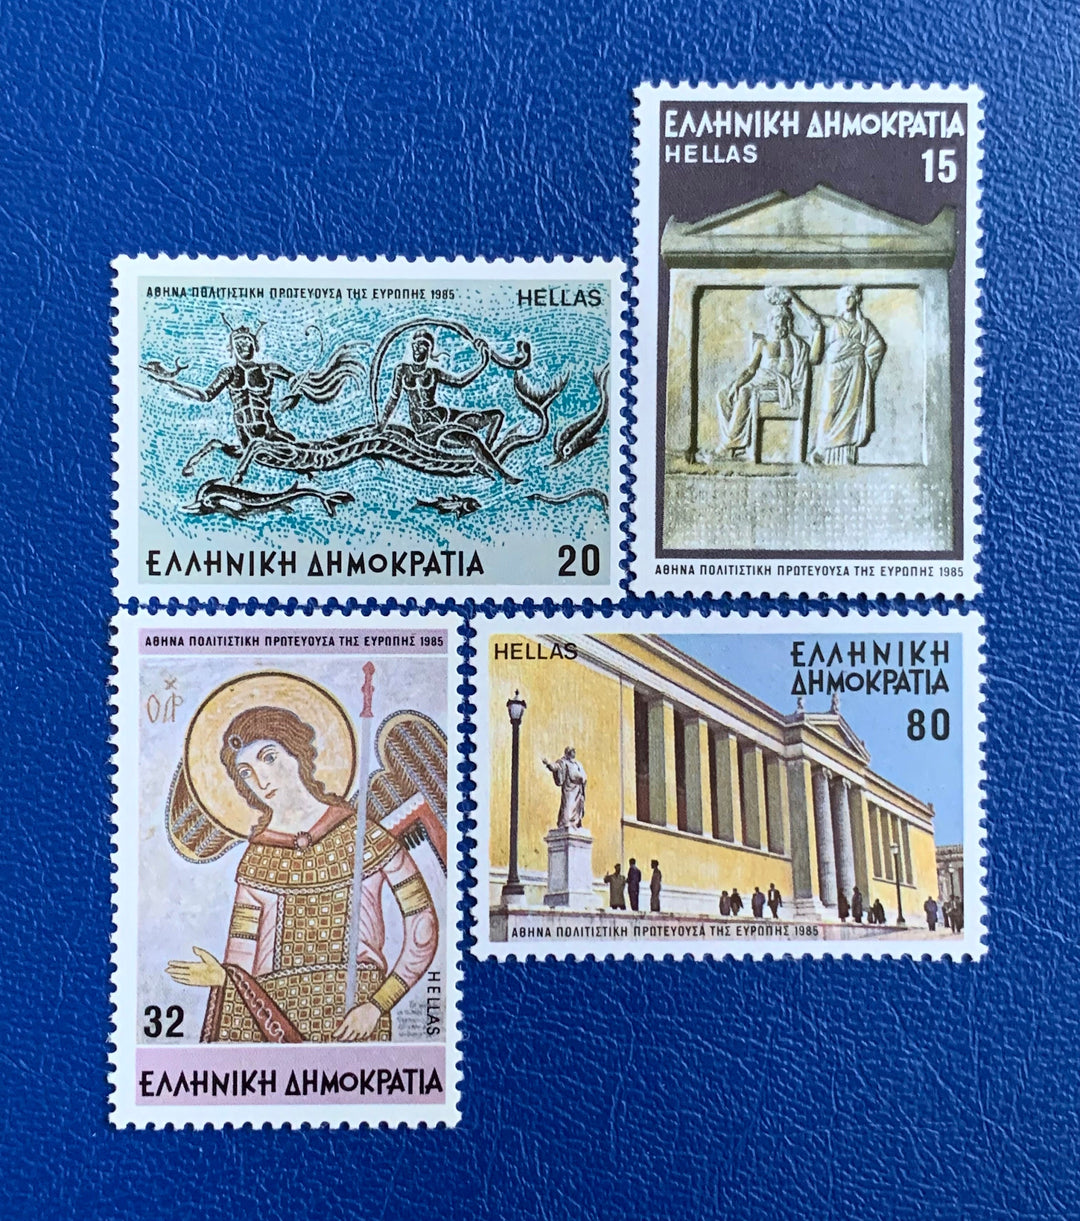 Greece - Original Vintage Postage Stamps- 1985 European Capitols of Culture: Athens - for the collector, artist or crafter